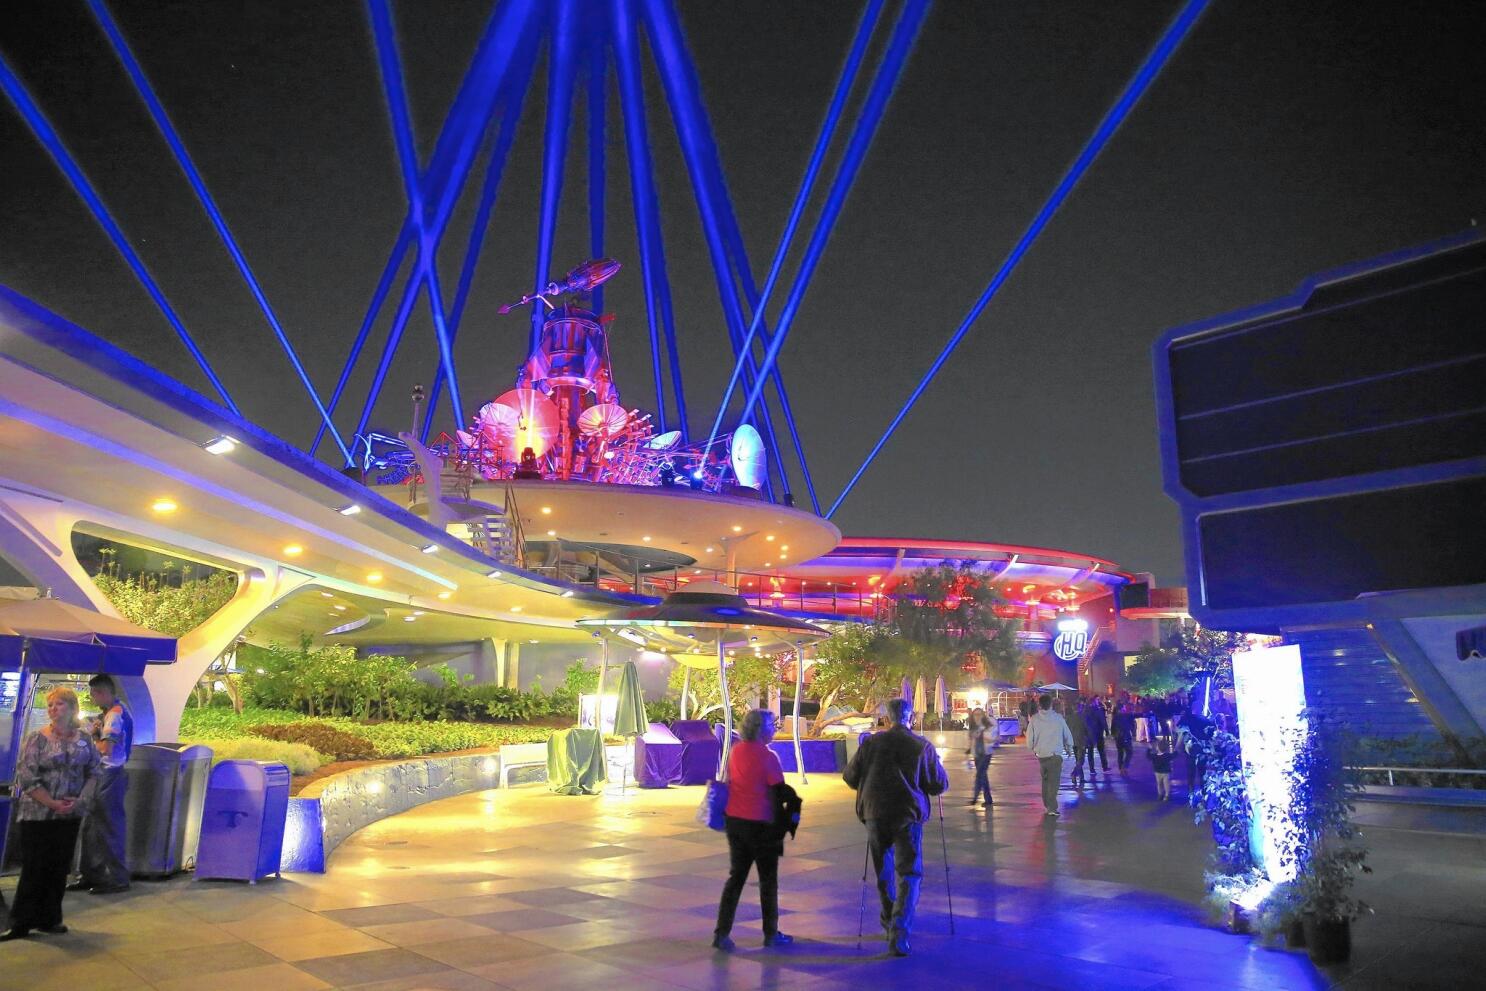 Disneyland to close some attractions to build 'Star Wars' land